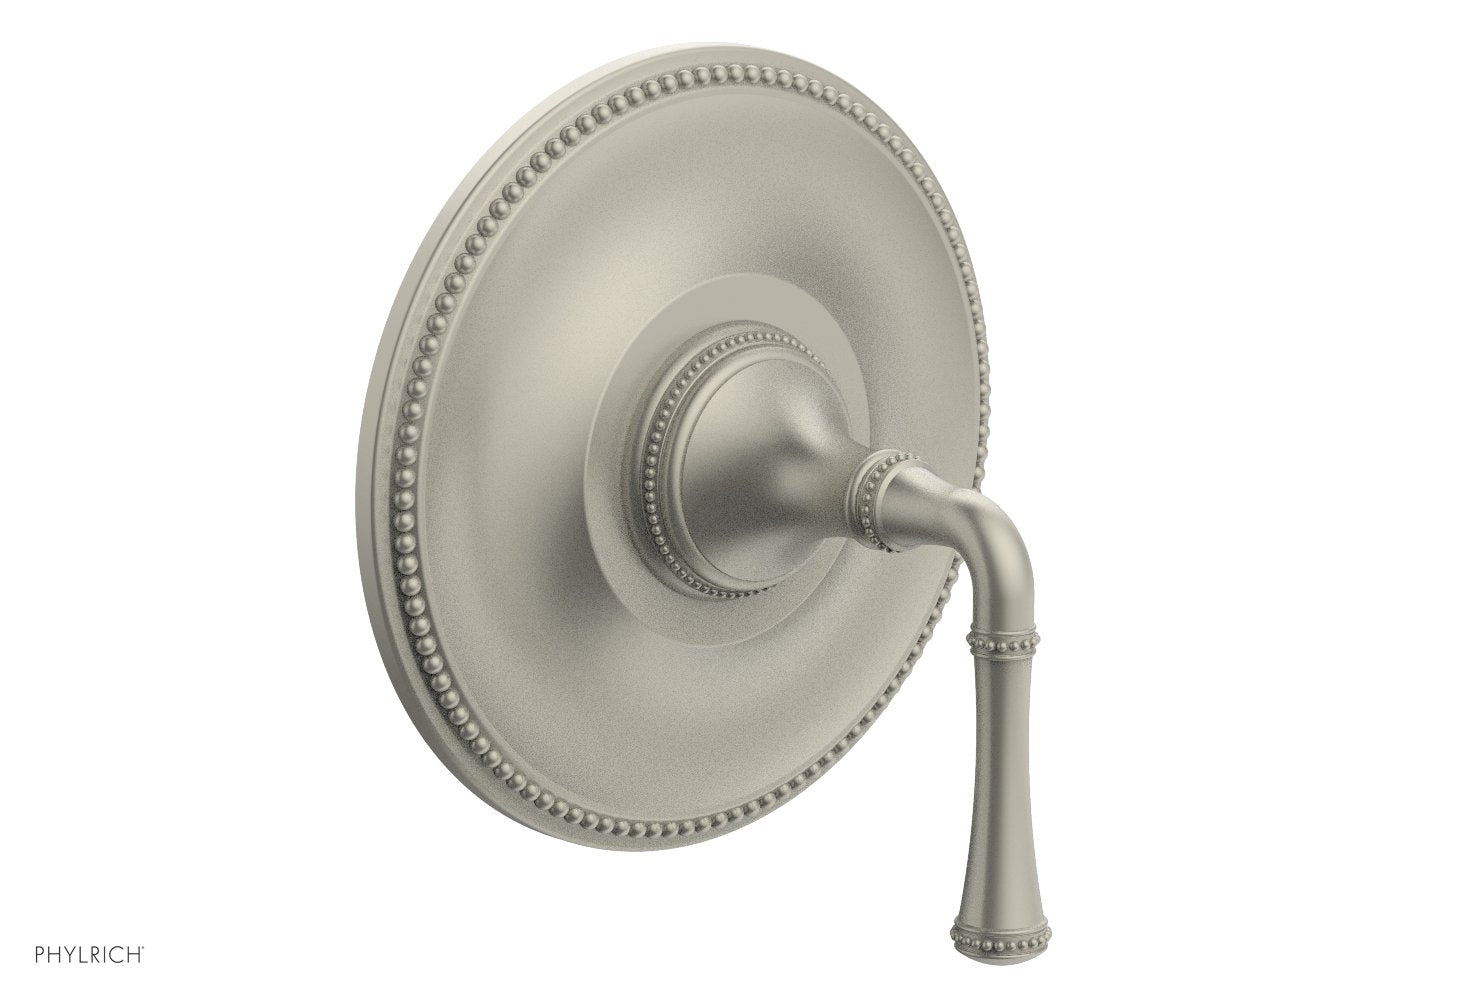 Phylrich BEADED Pressure Balance Shower Plate & Handle Trim